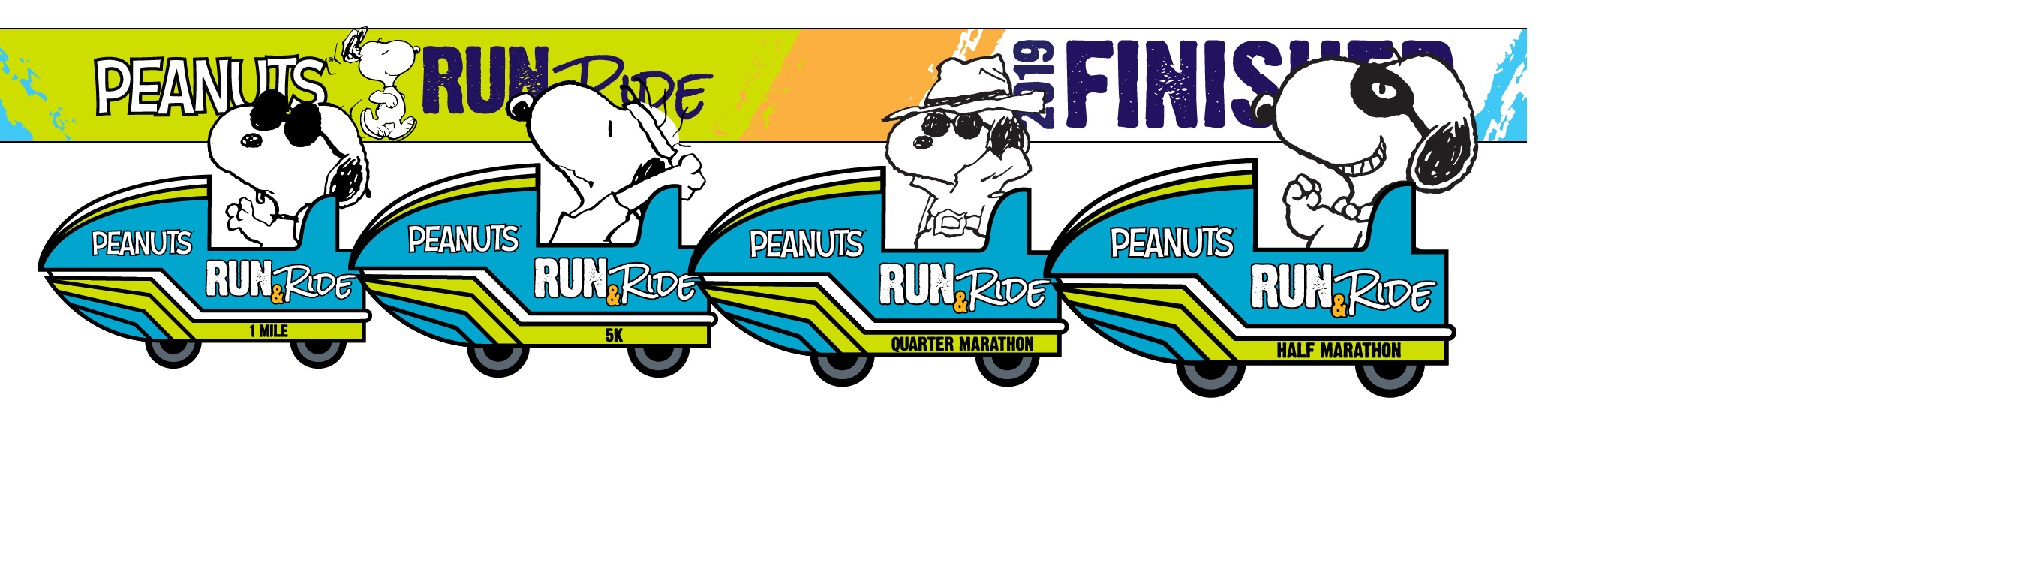 2019 Run and Ride Series Finisher Medals